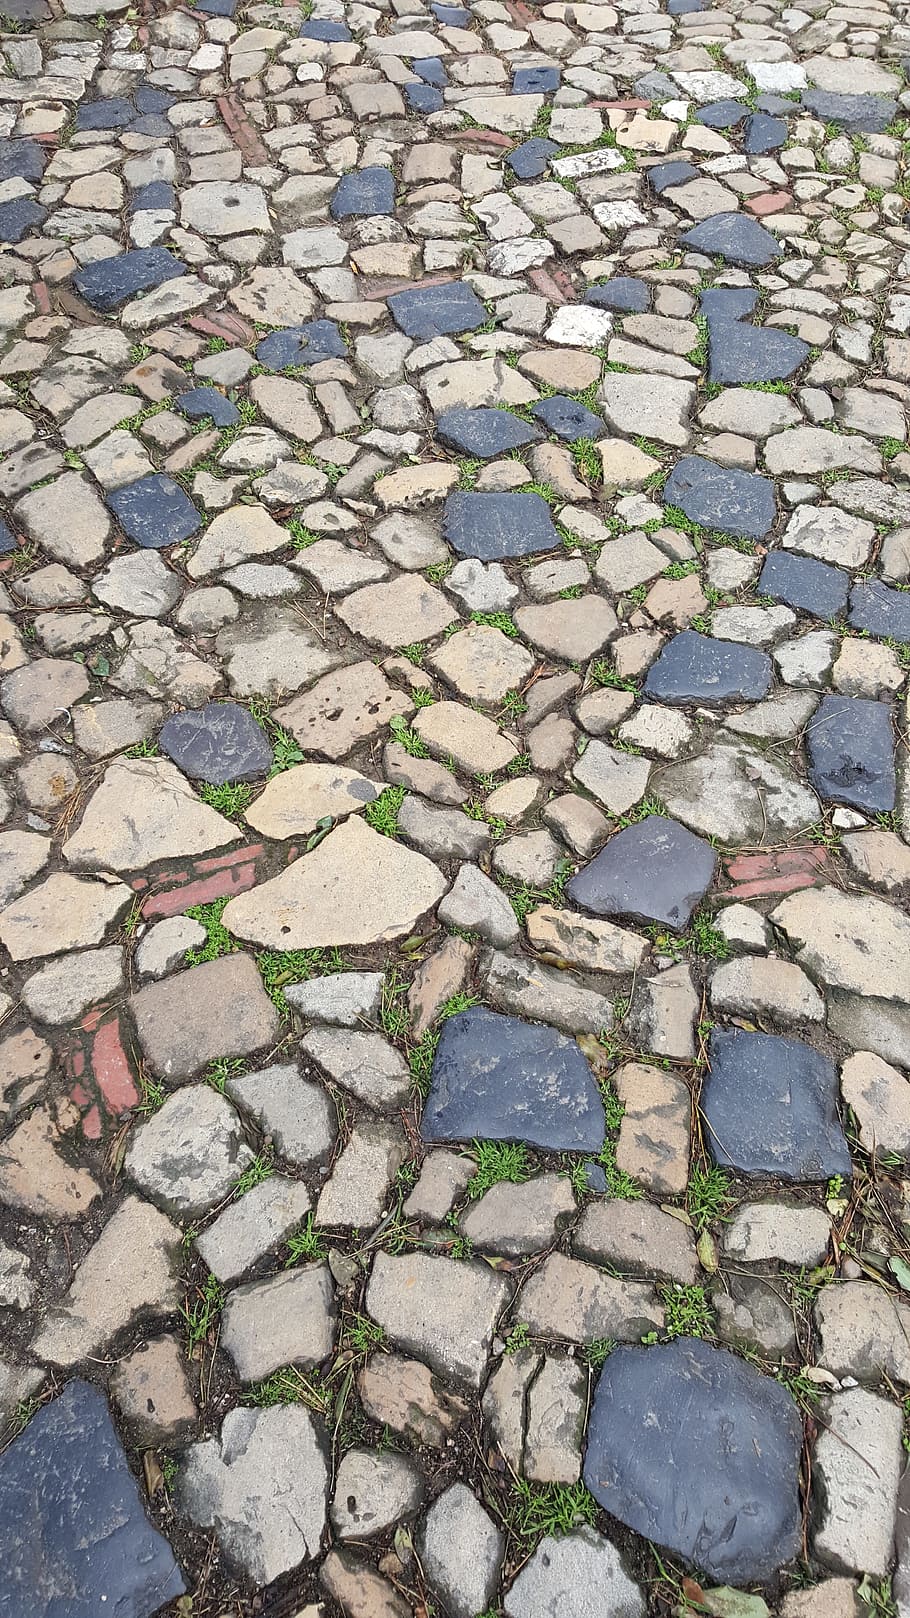 Pavers, Roads, Lisbon, Mosaic, pattern, backgrounds, stone material, full frame, textured, cracked